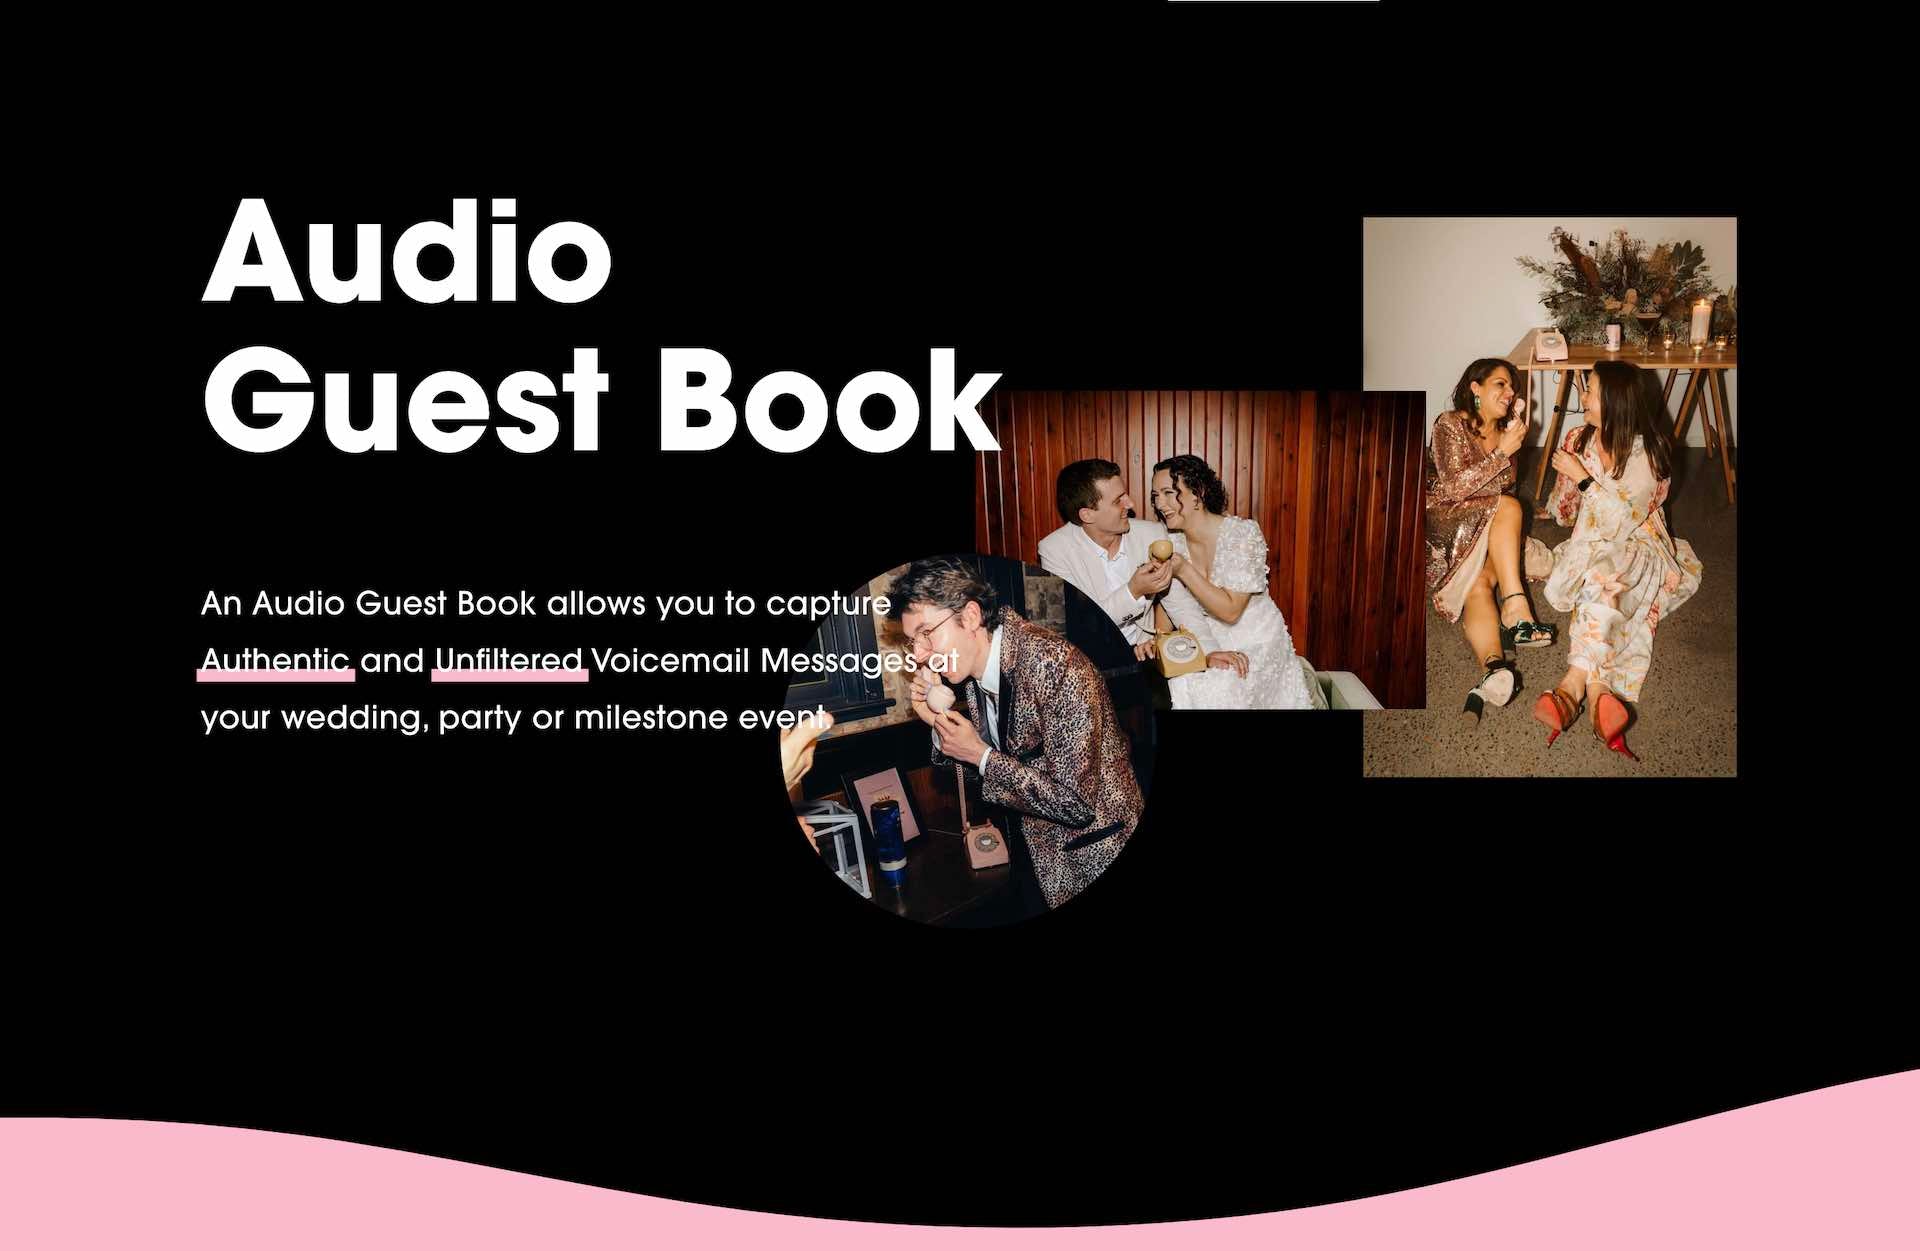 Website home landing page of At the Beep Audio Guest Book